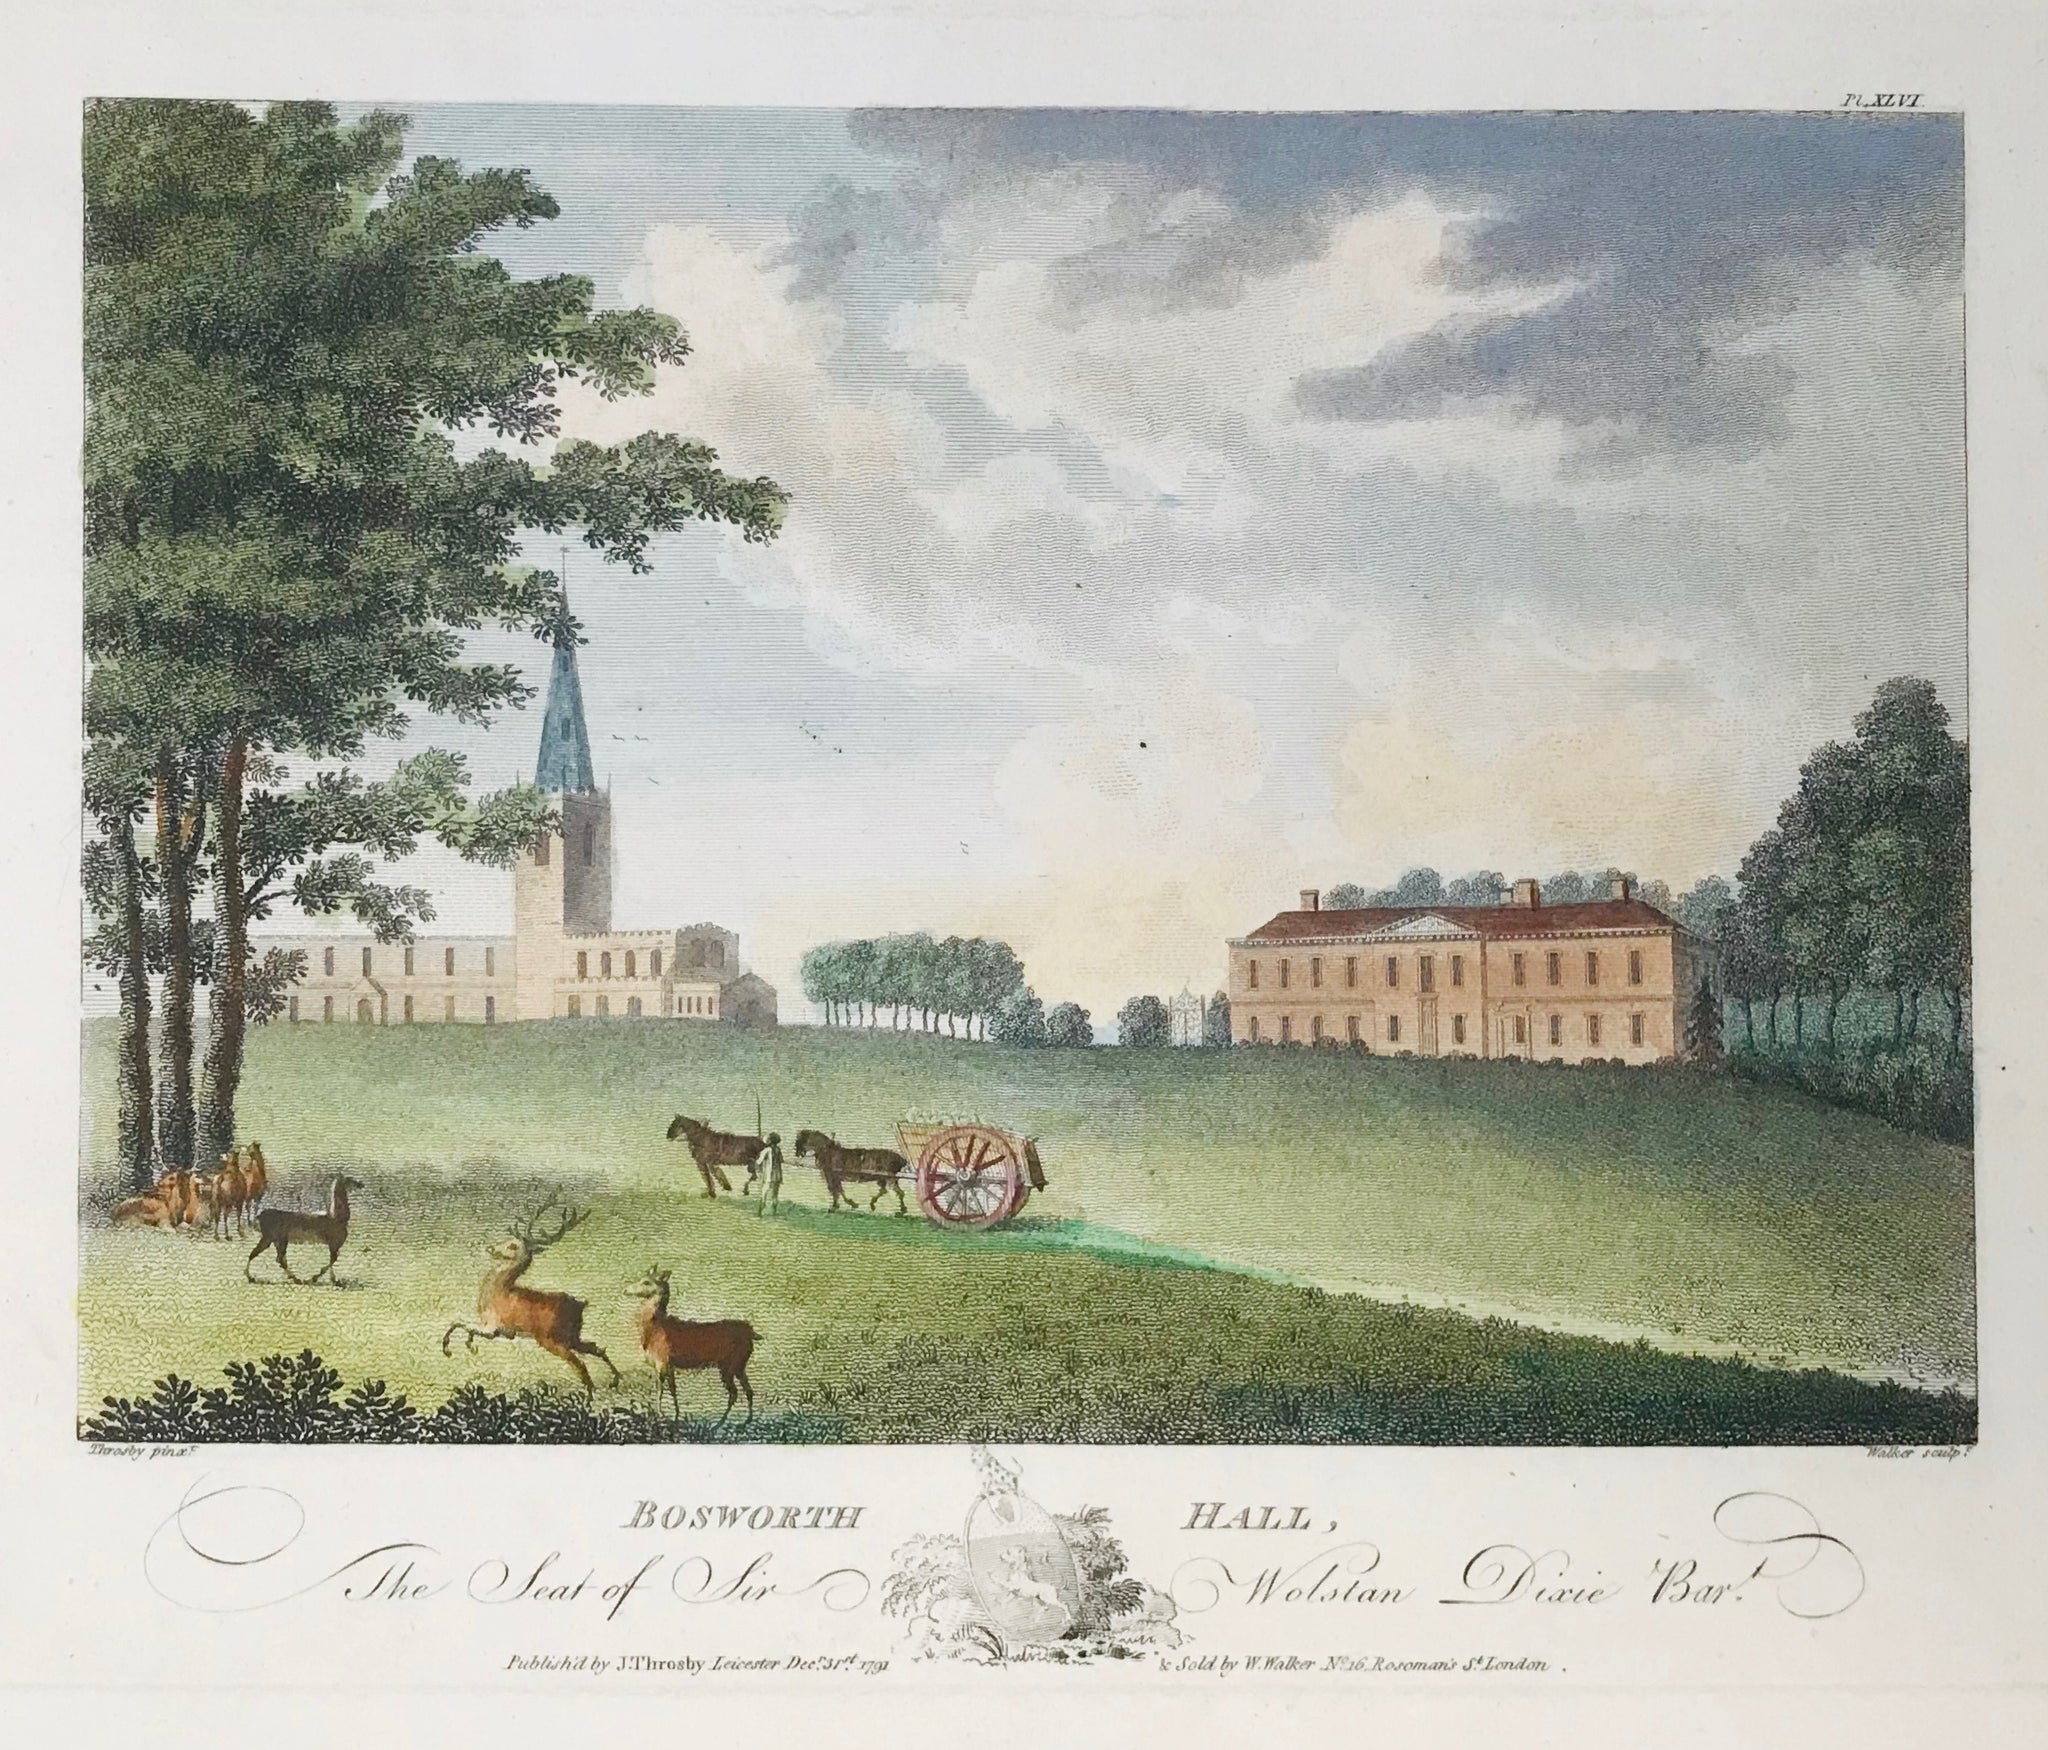 Bosworth Hall  The Seat of Sir Wolstan Dixie Bar  By Walker after Throsby dated 1791.  12.5 x 17.7 cm ( 4.9 x 6.9 ")  Castles, Landscapes and Estates of England and Scotland